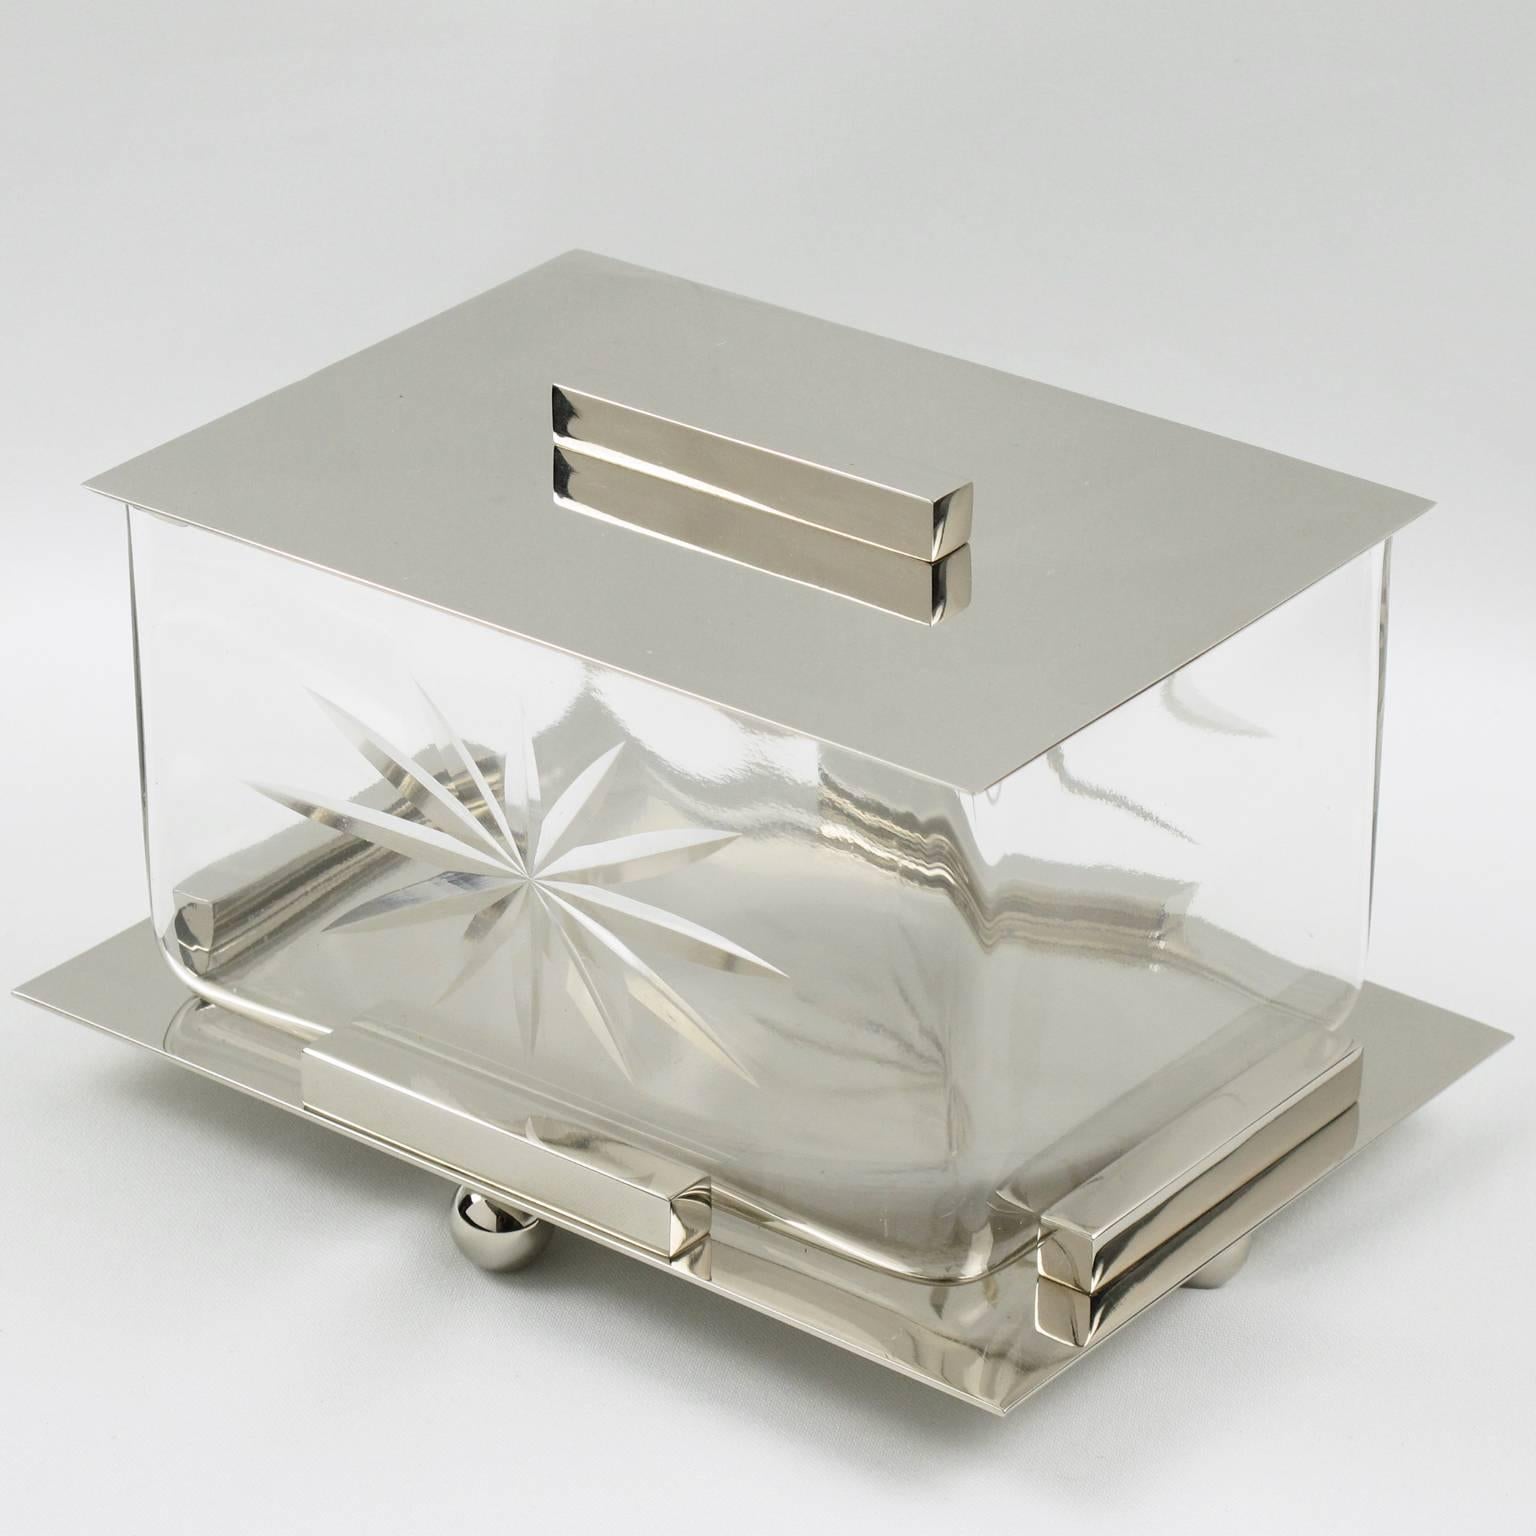 Elegant vintage French Art Deco chrome and crystal decorative cookie box, circa 1930s. Modernist Minimalist design with heavy chromed metal holder base and lid. Crystal cut insert bowl with large star etching on both sides. Excellent vintage